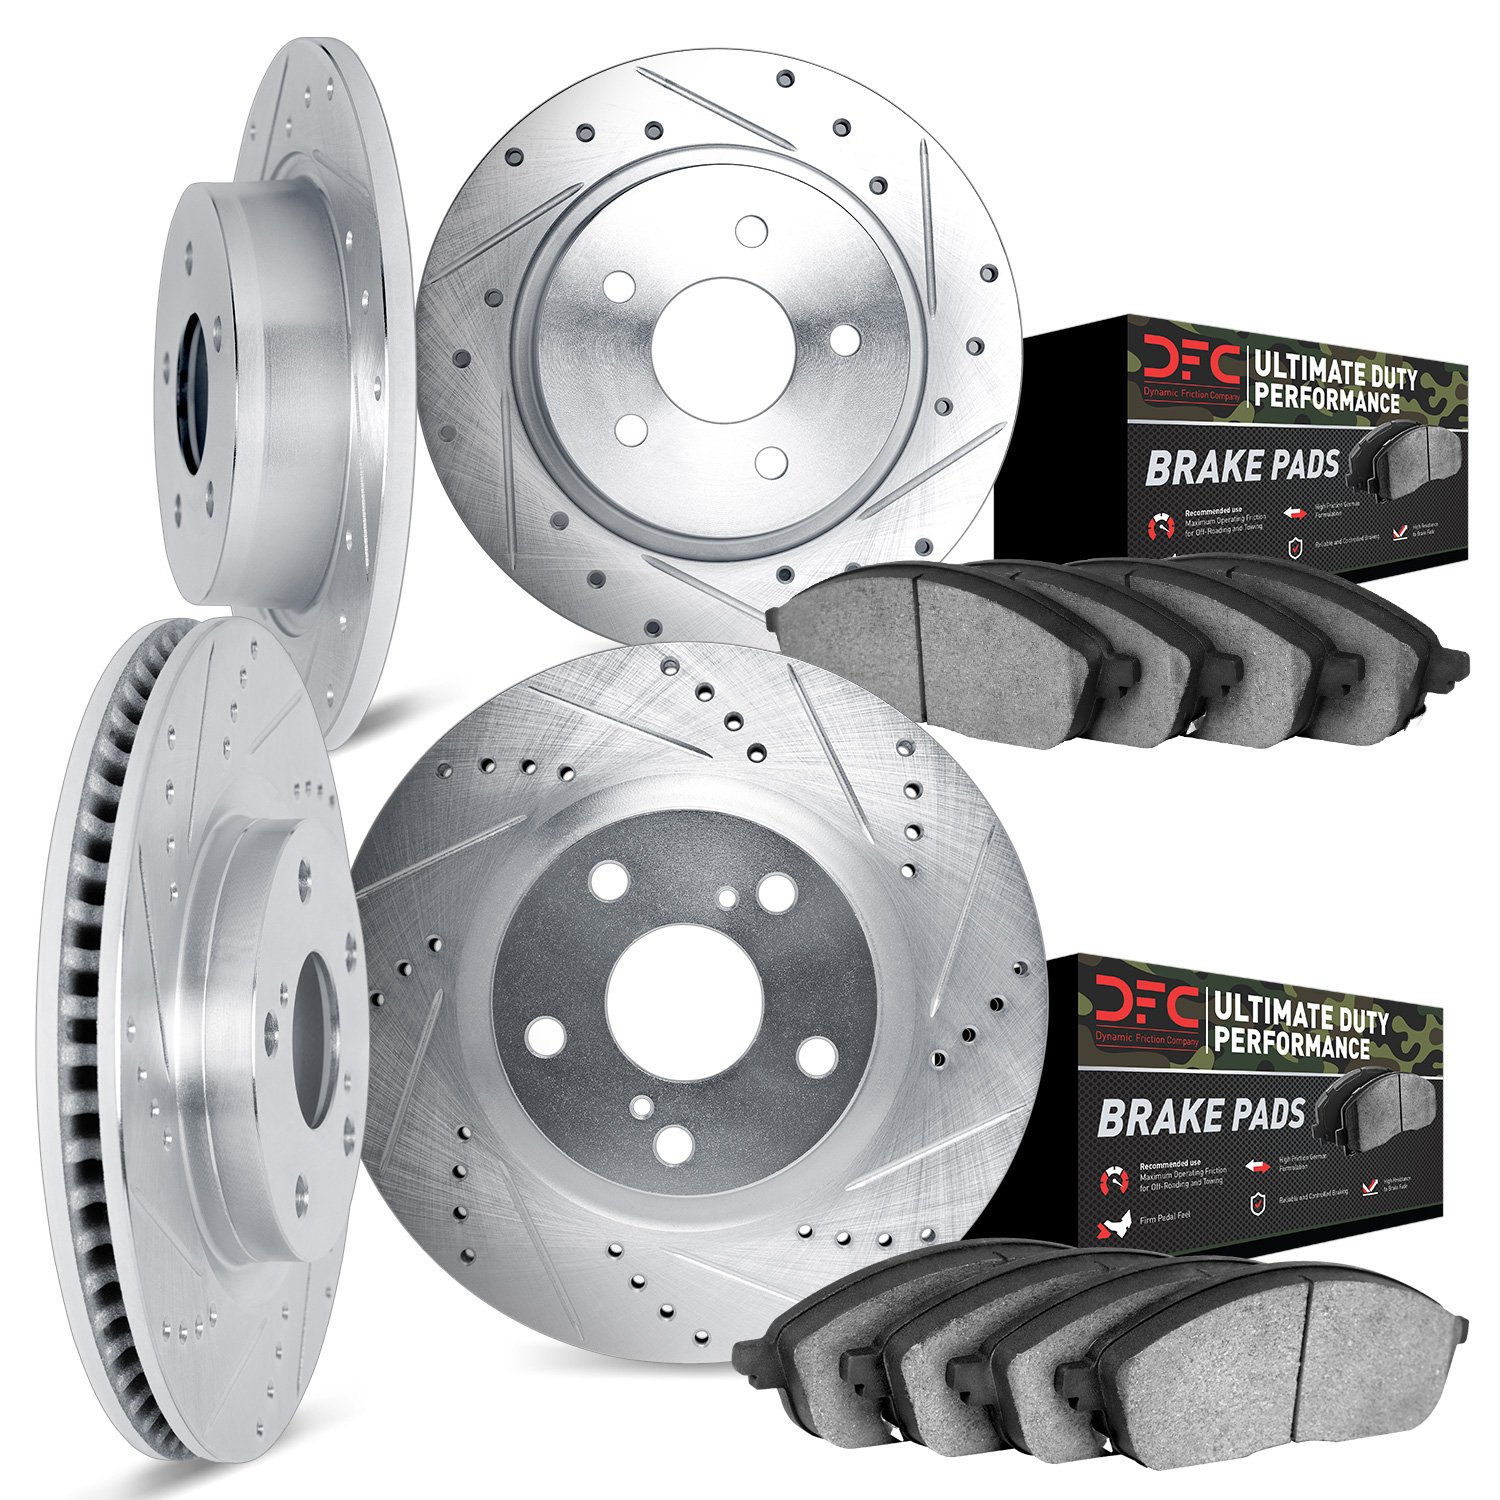 7404-42012 Drilled/Slotted Brake Rotors with Ultimate-Duty Brake Pads Kit [Silver], 1993-1998 Mopar, Position: Front and Rear